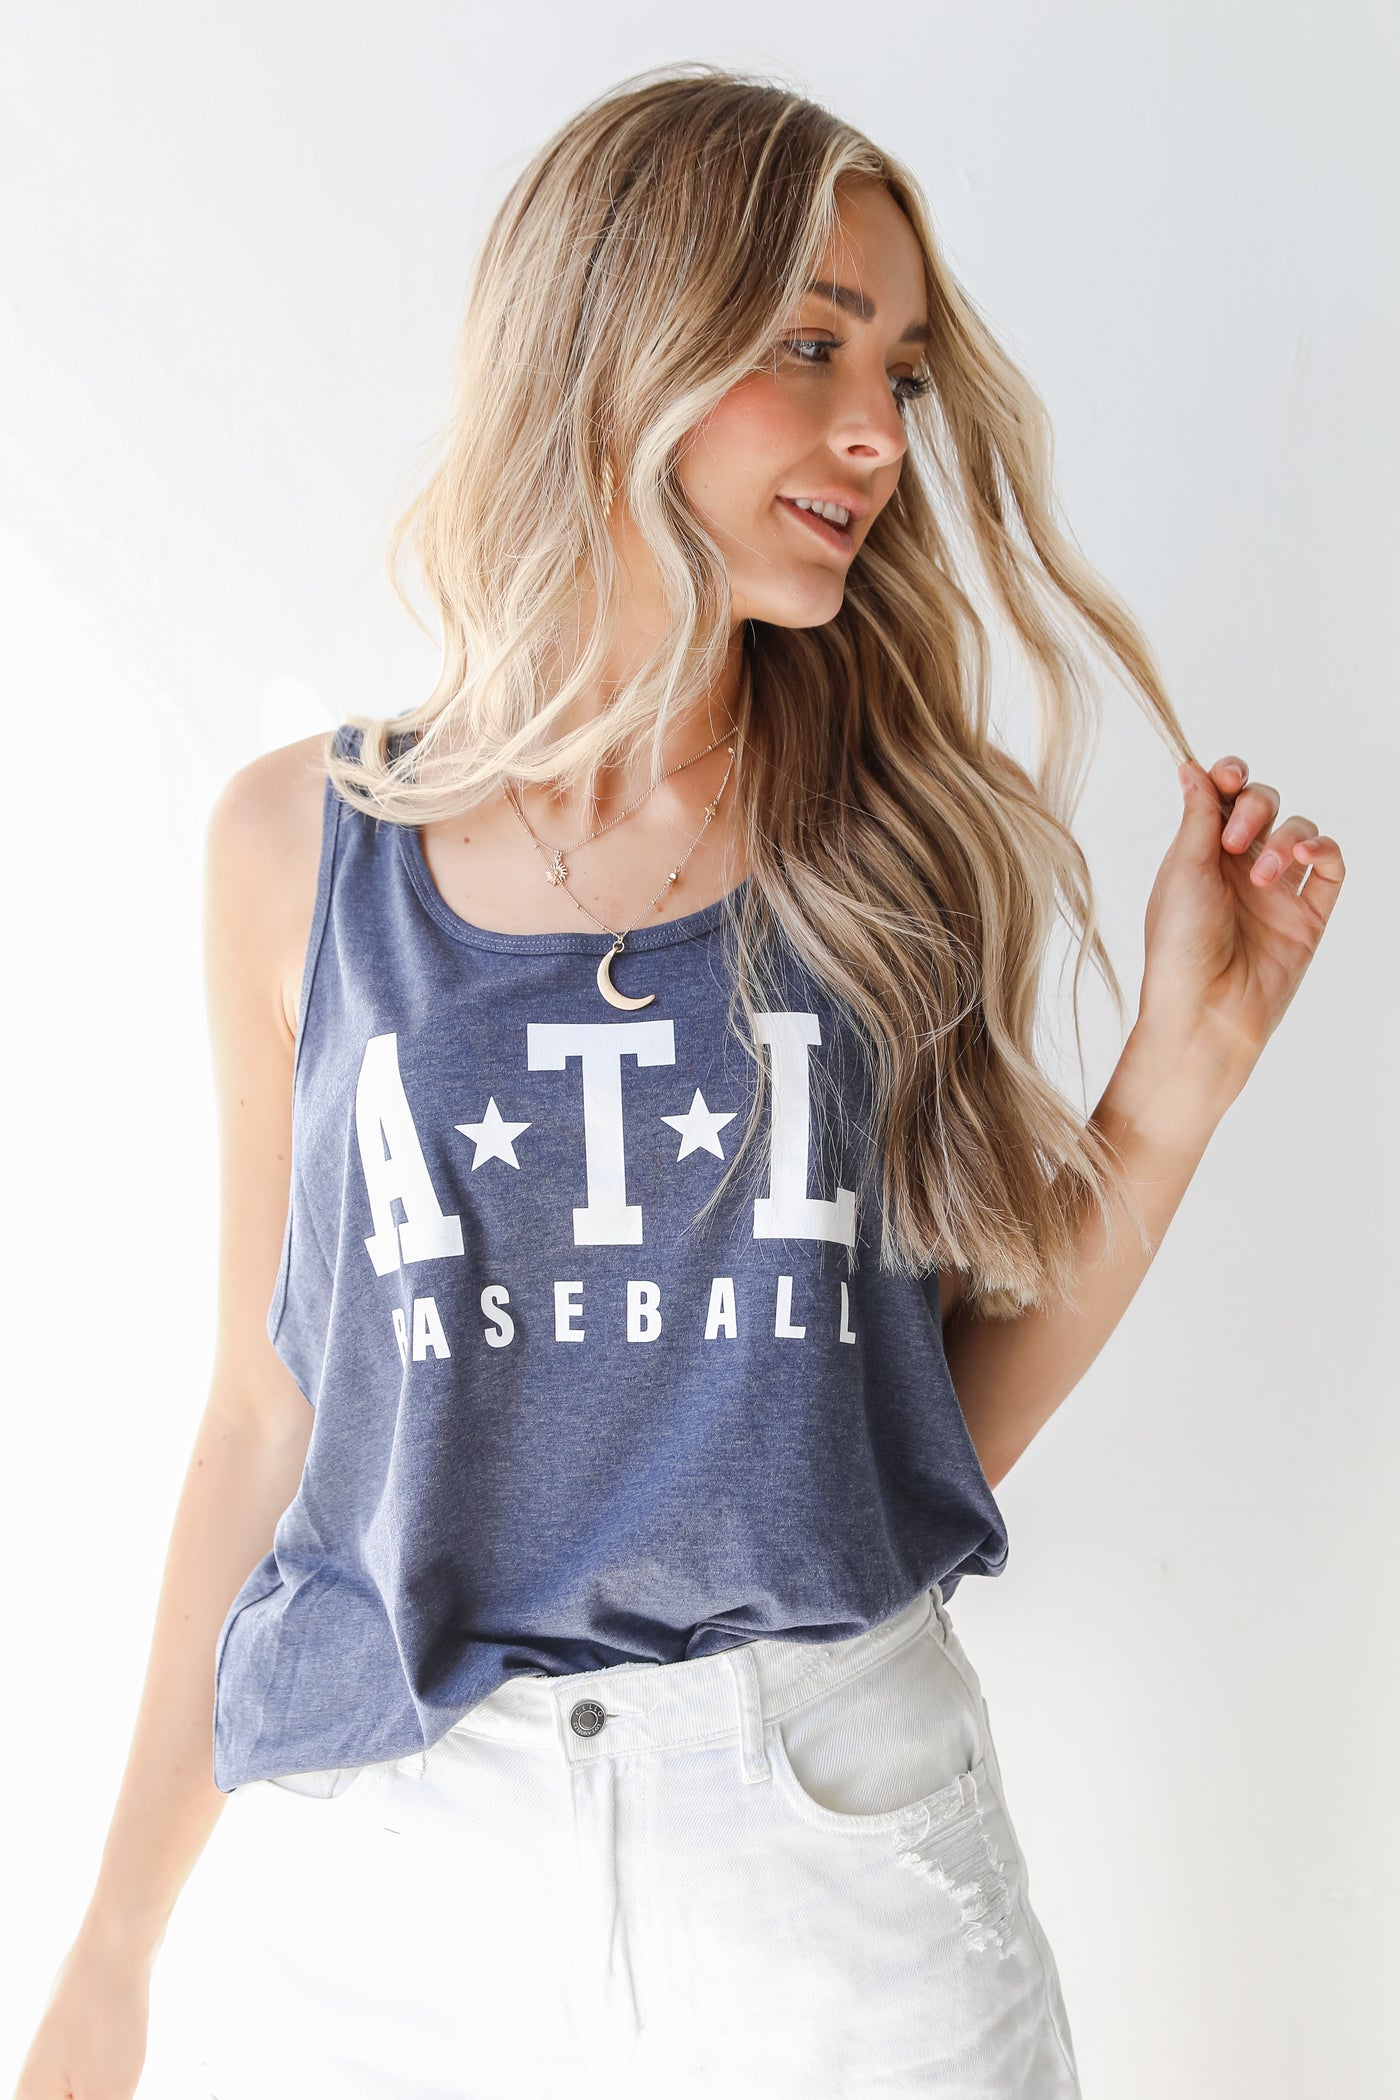 ATL Star Baseball Graphic Tank in navy front view